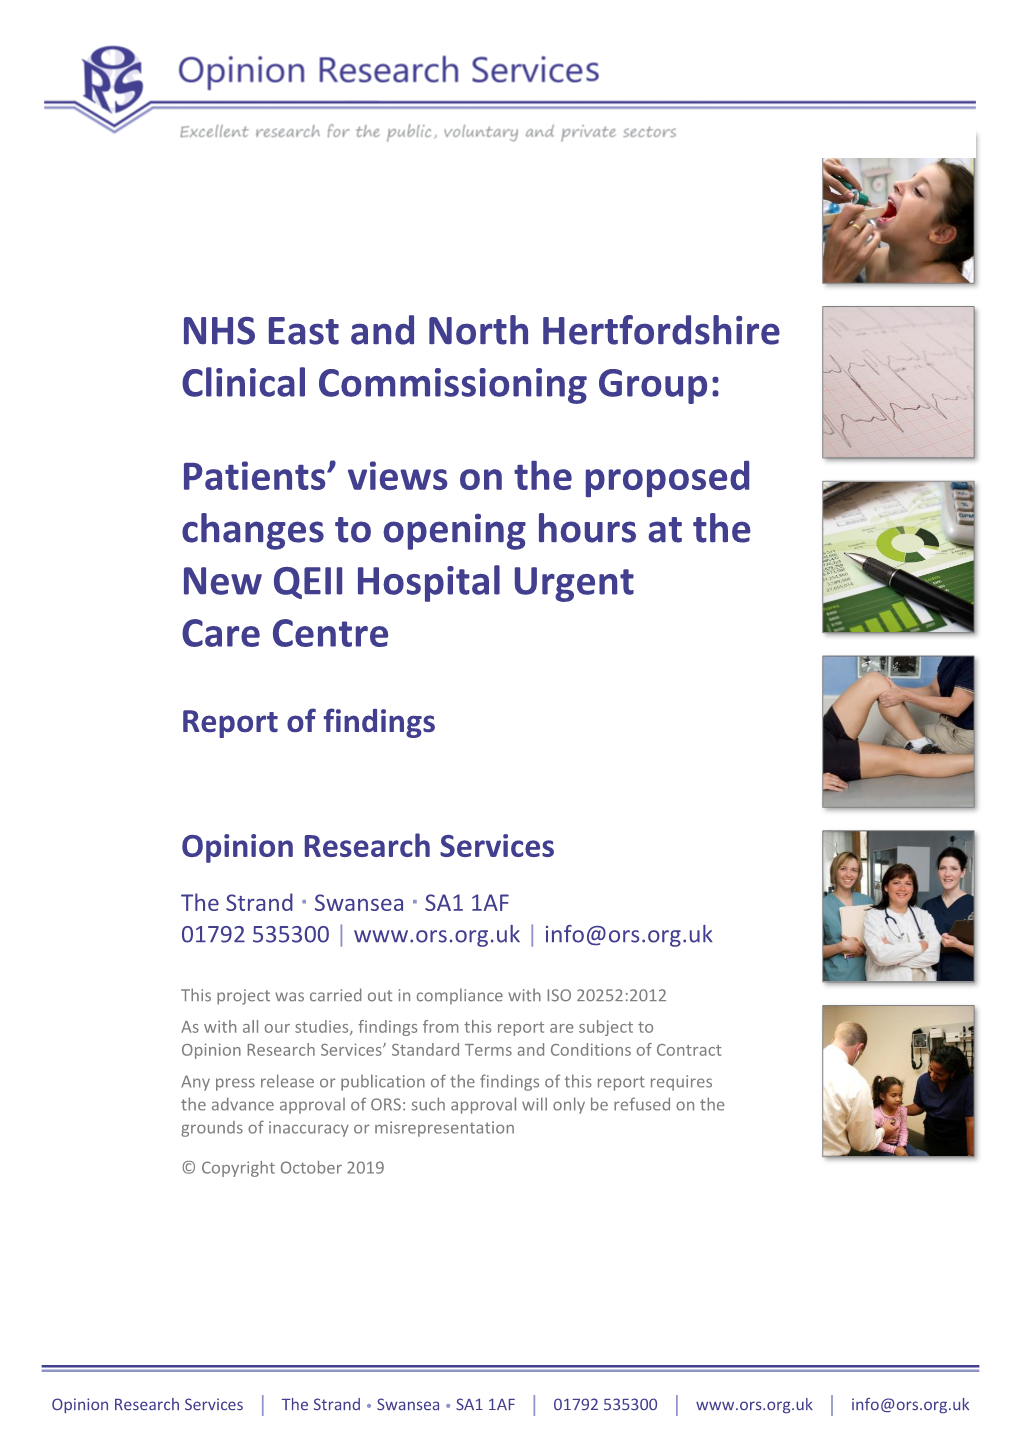 NHS East and North Hertfordshire Clinical Commissioning Group